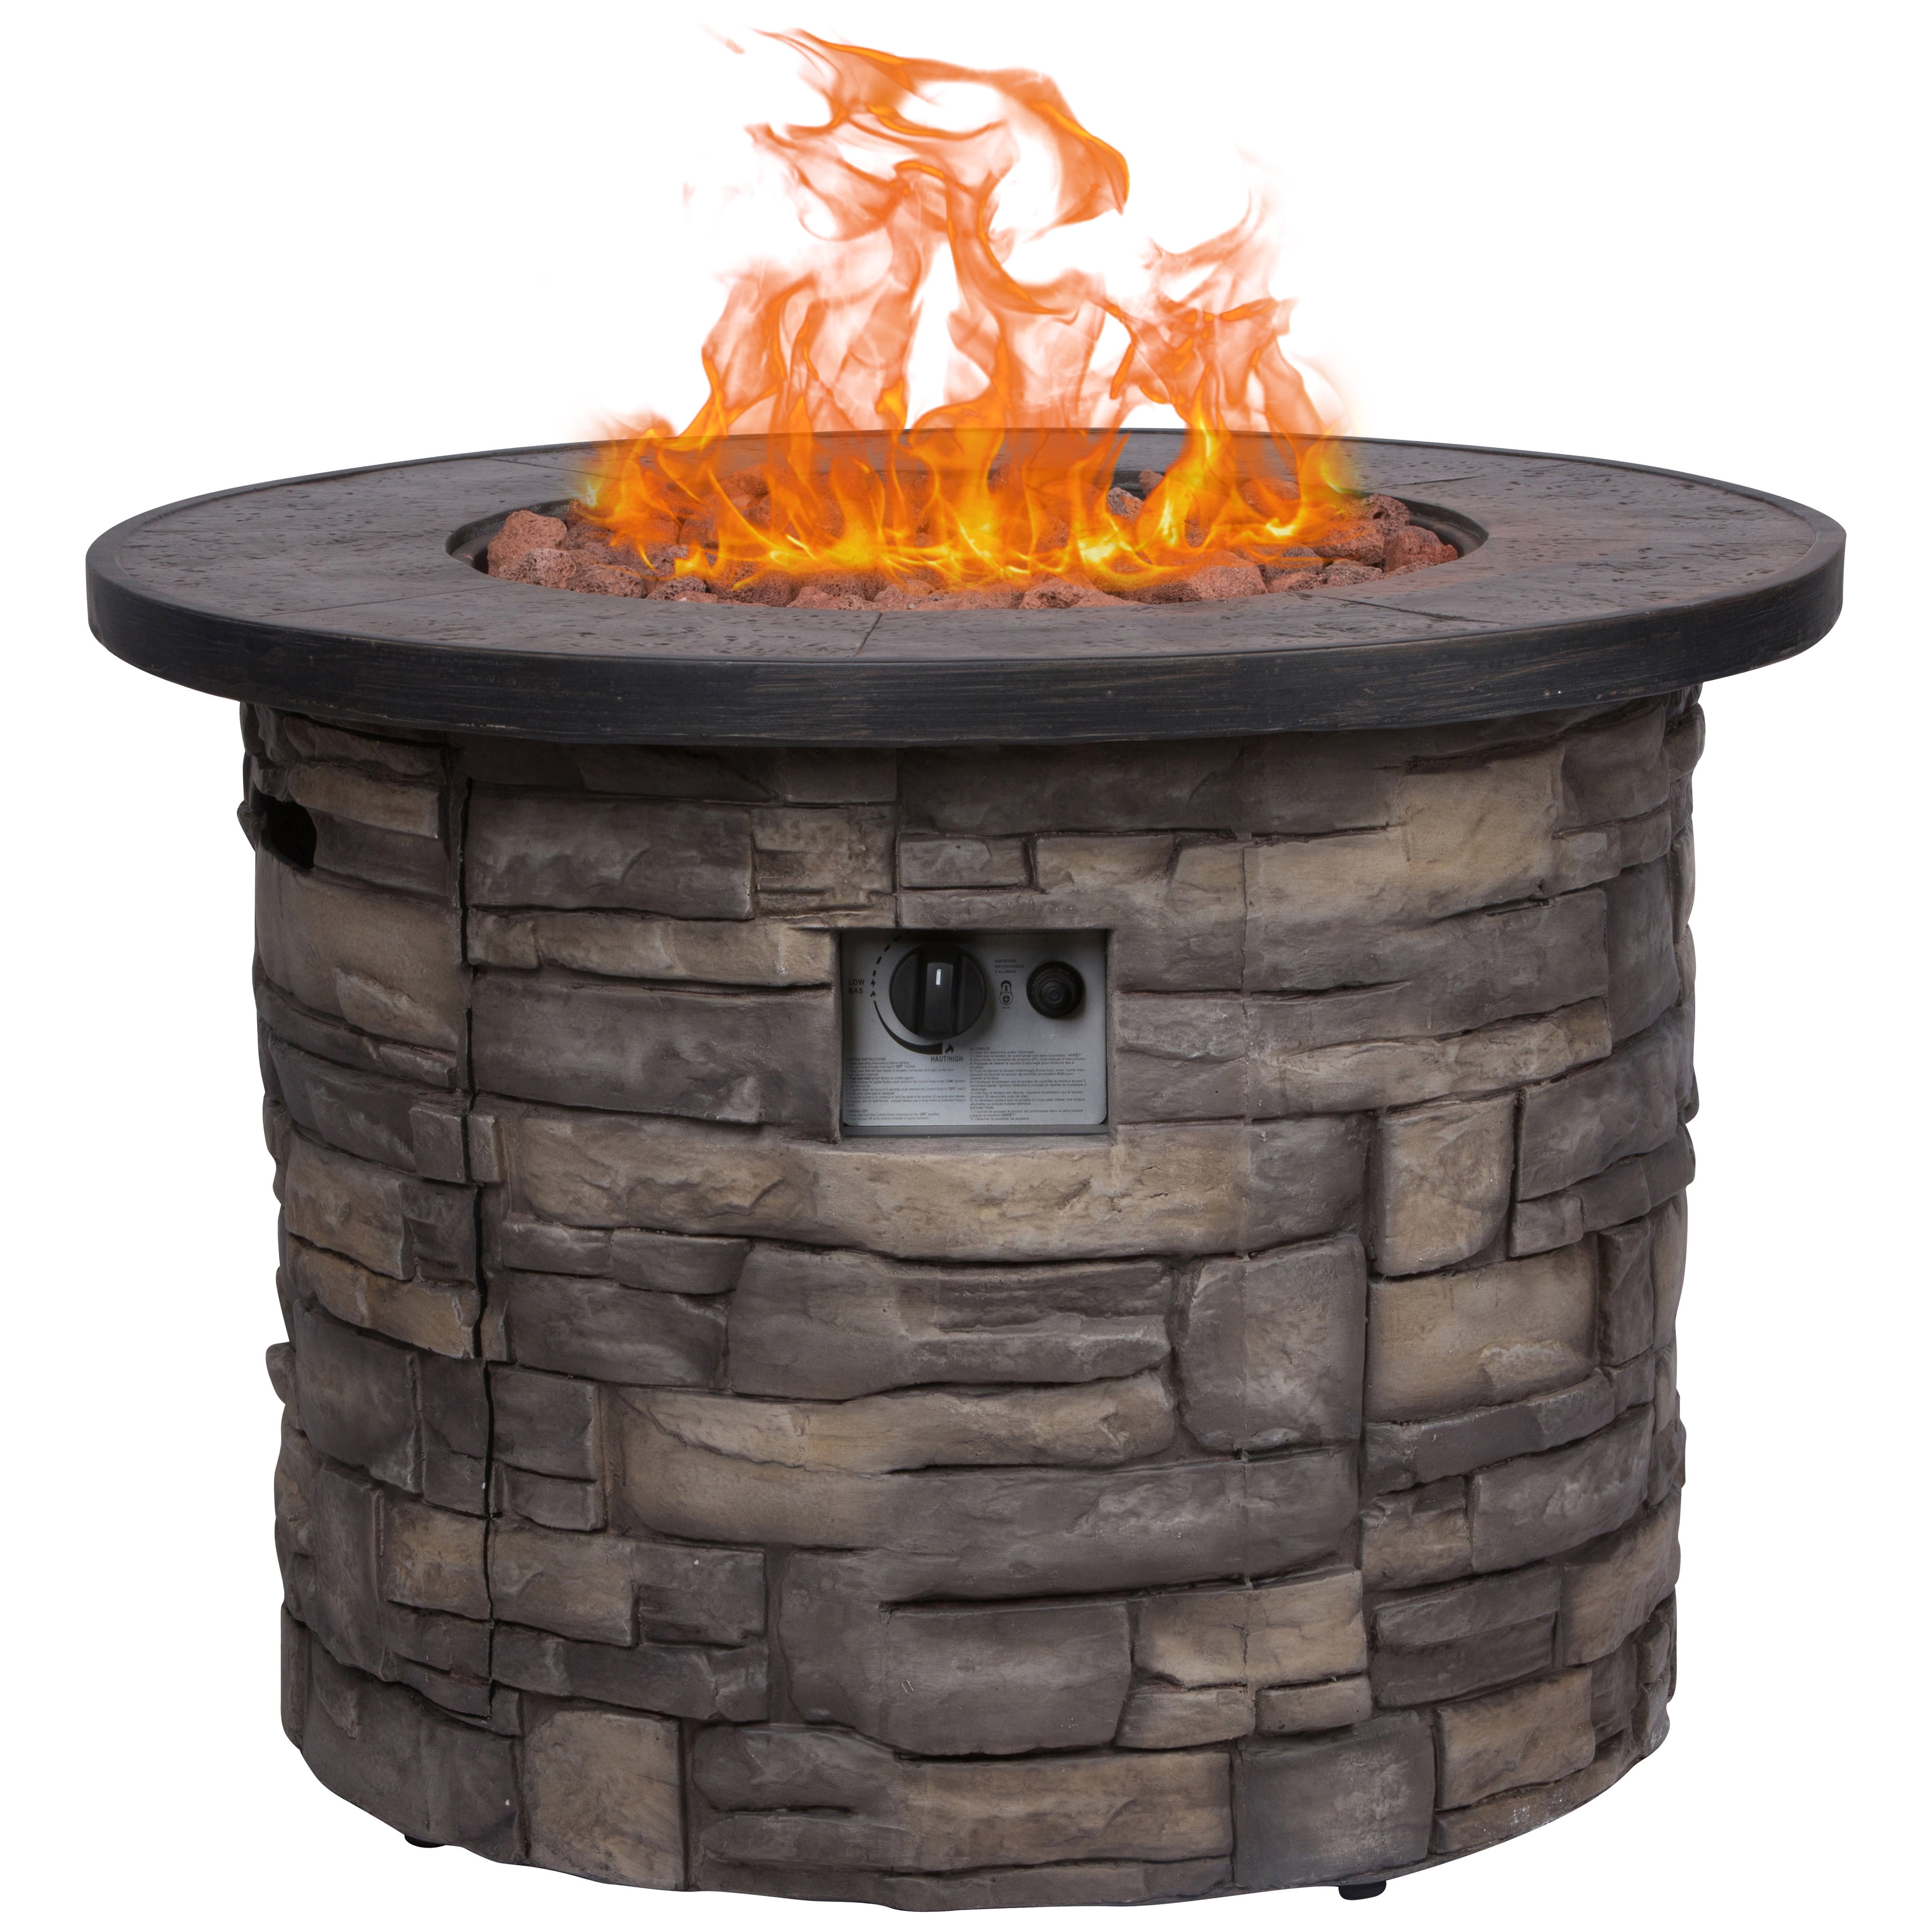 Round Outdoor Fire Pit Table Stone, Creating A Gas Fire Pit